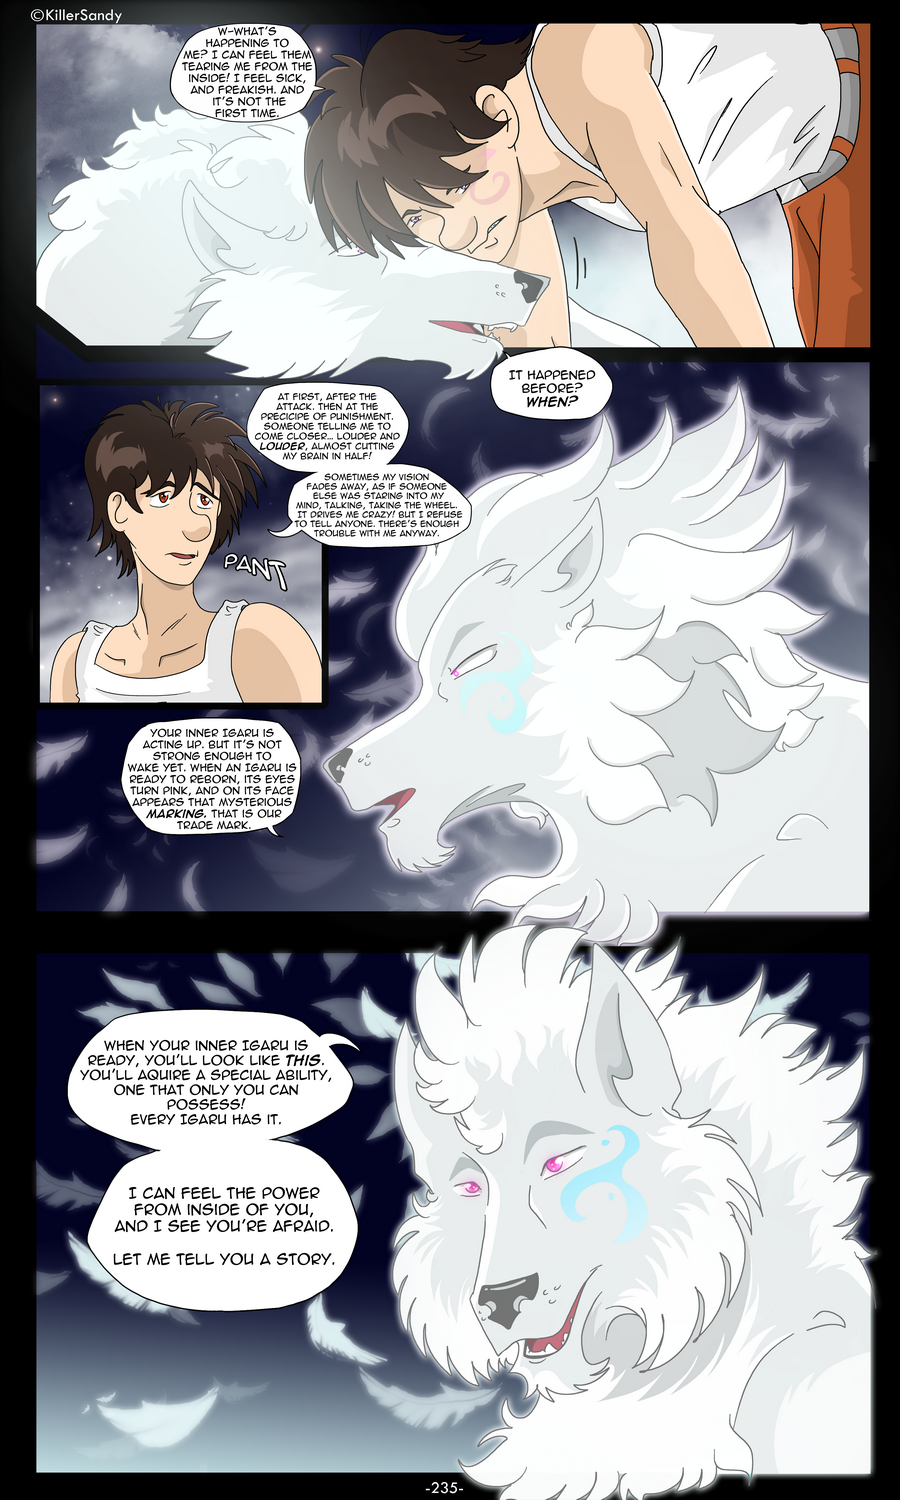 The Prince of the Moonlight Stone page 235